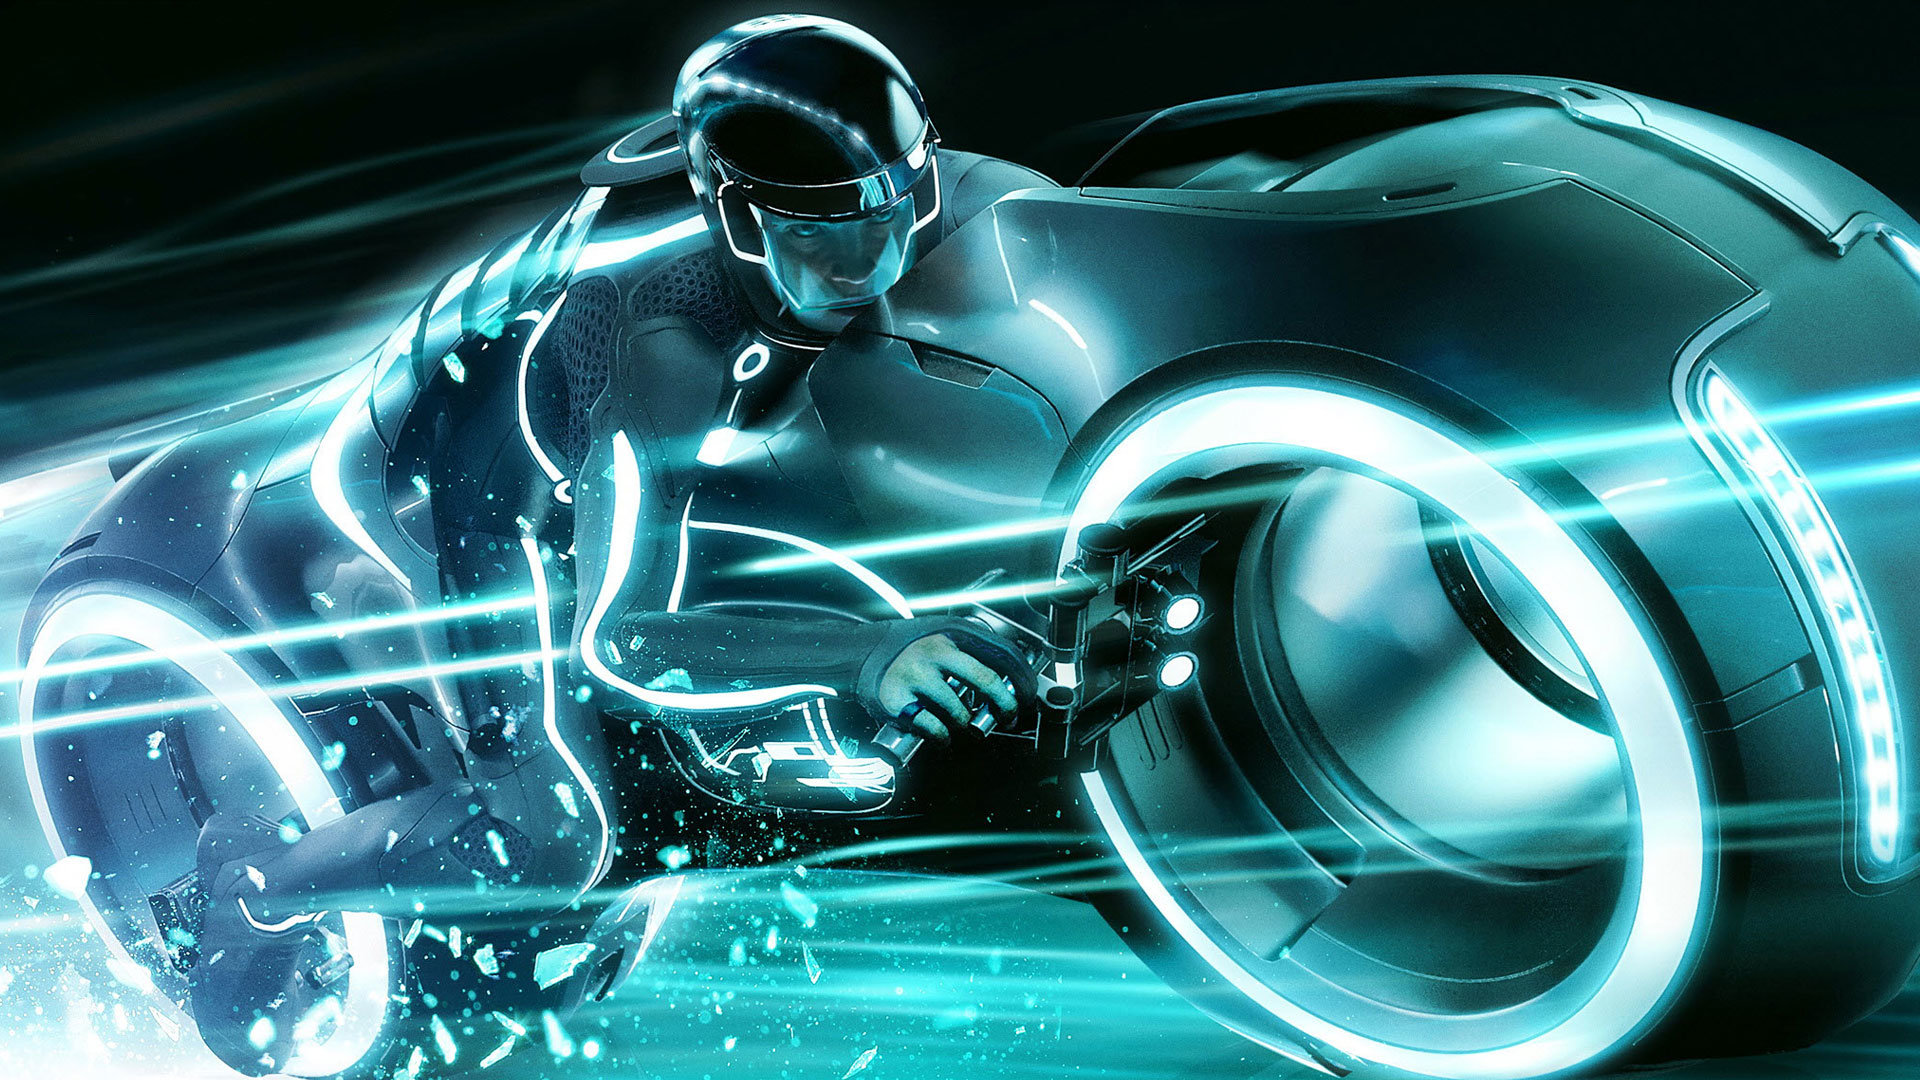 download video tron legacy full movie